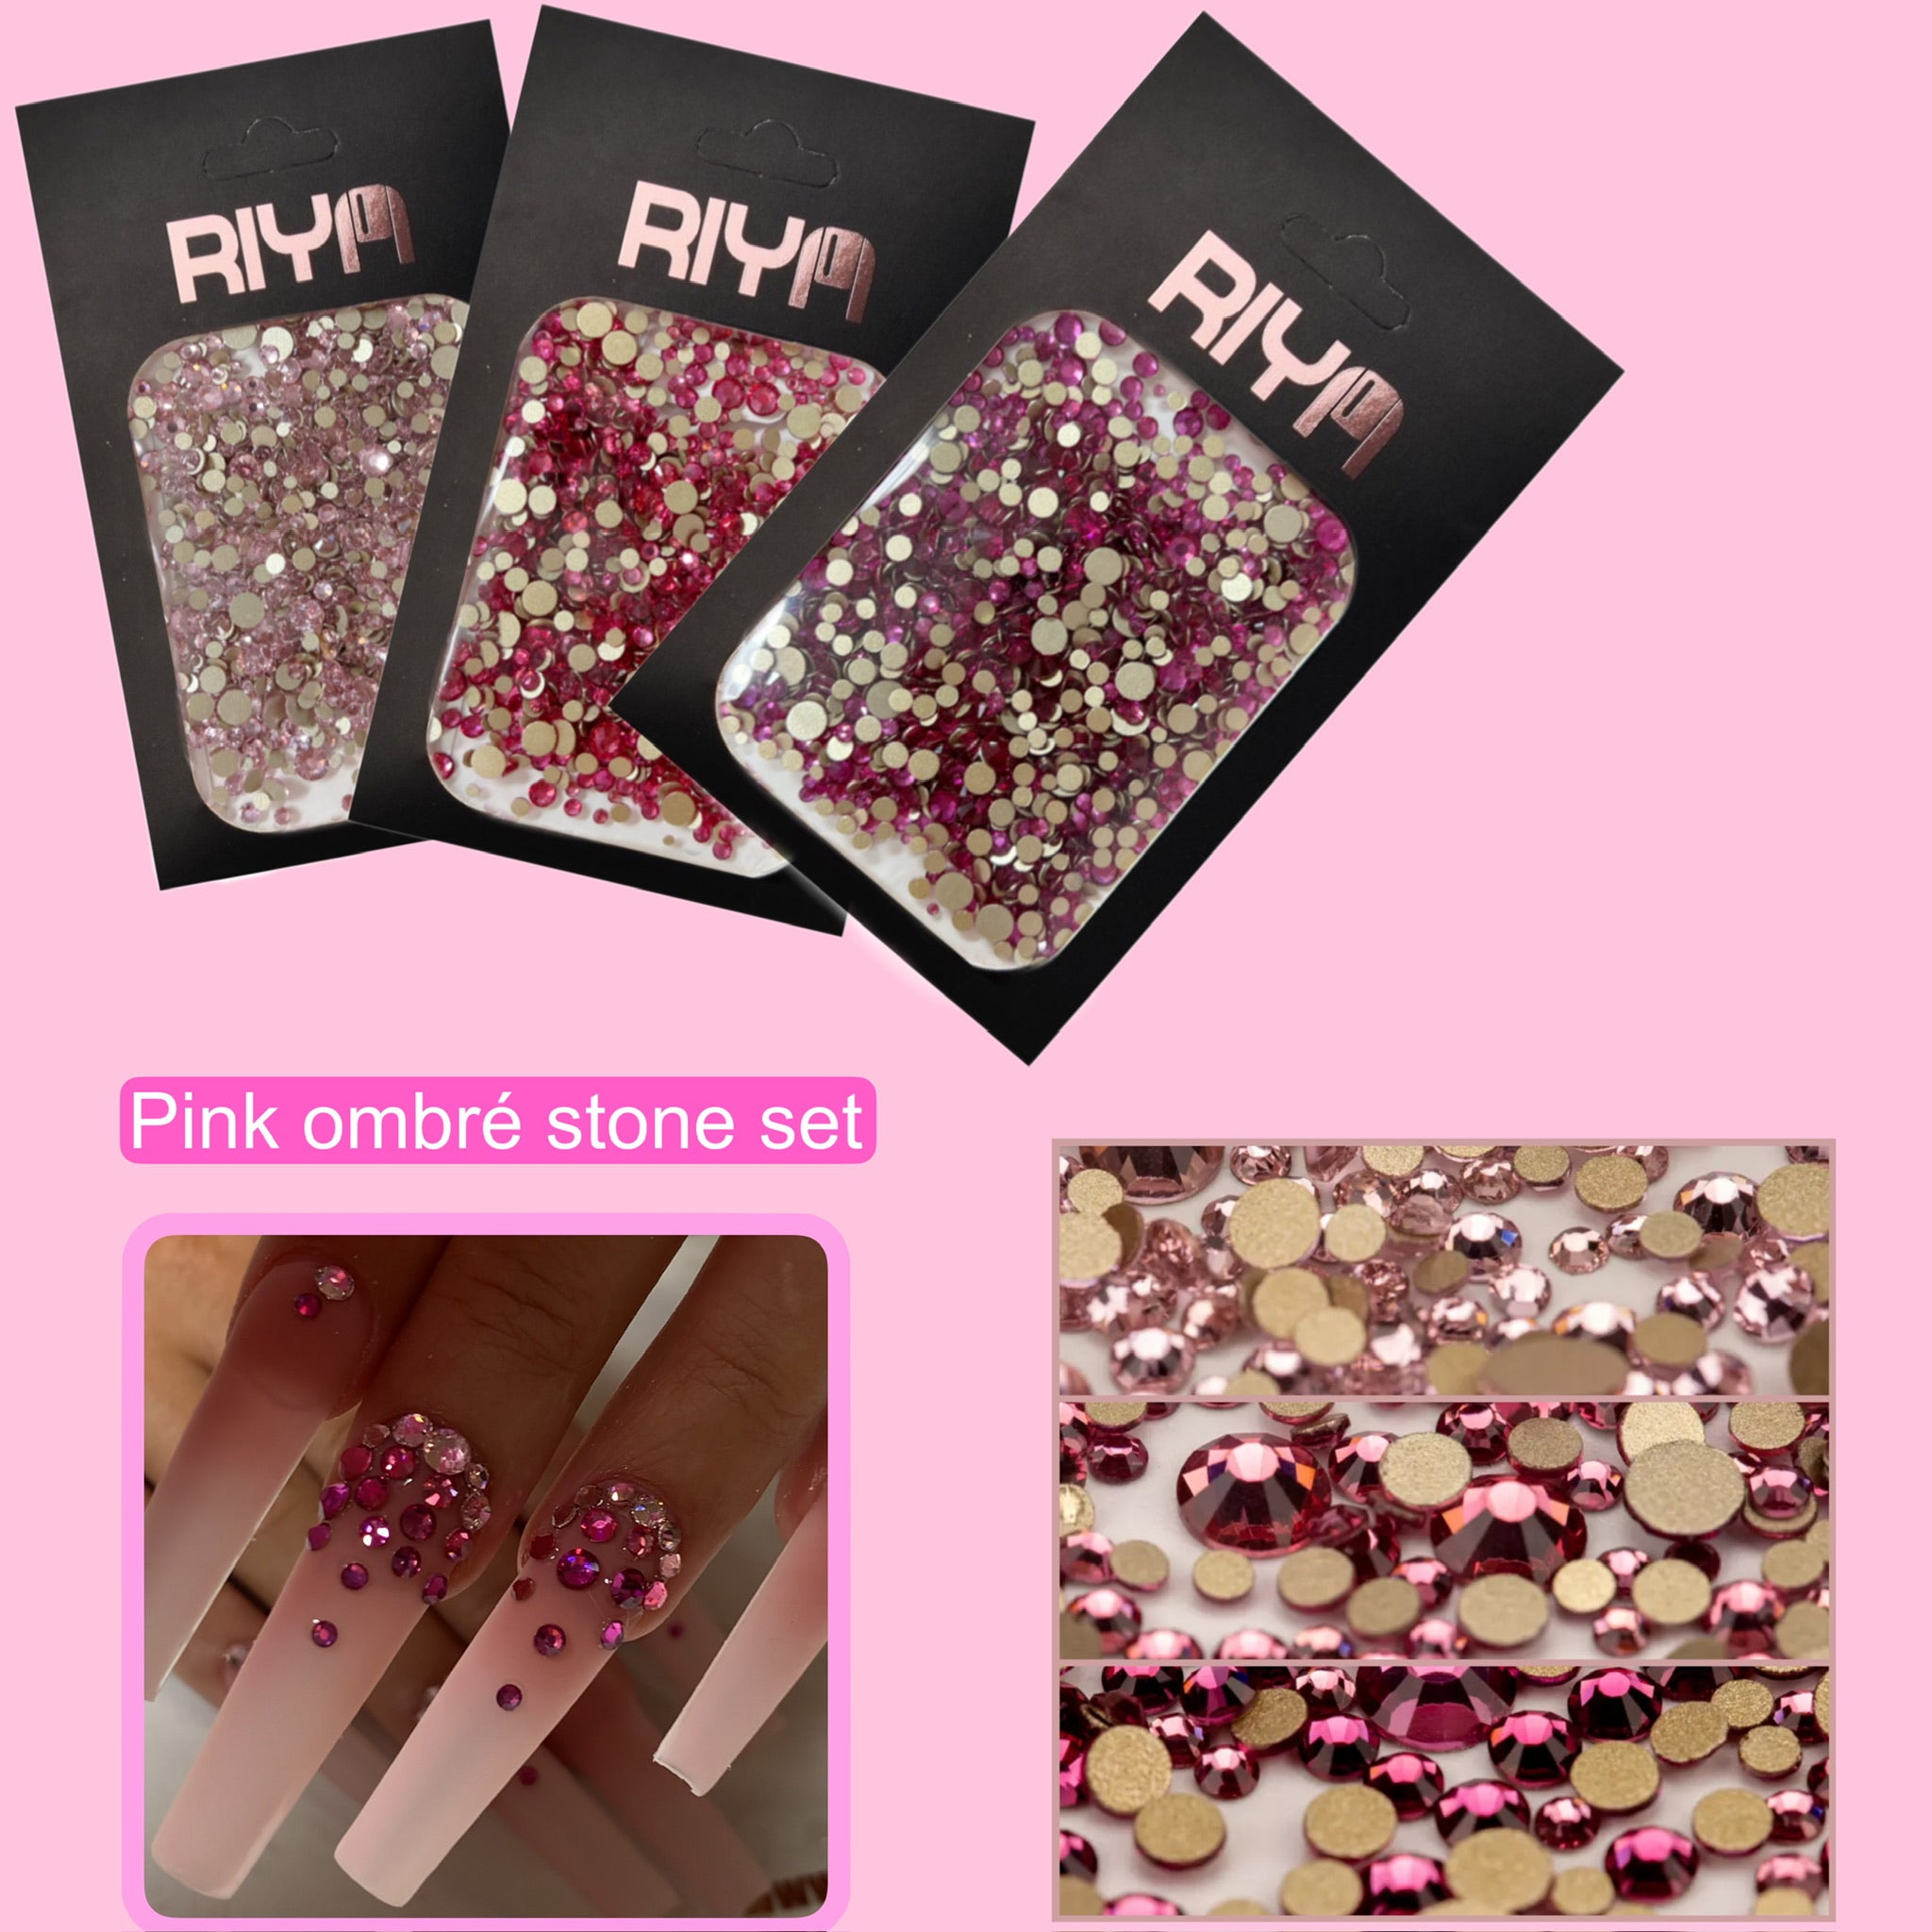 Pink Ombre Stone Set